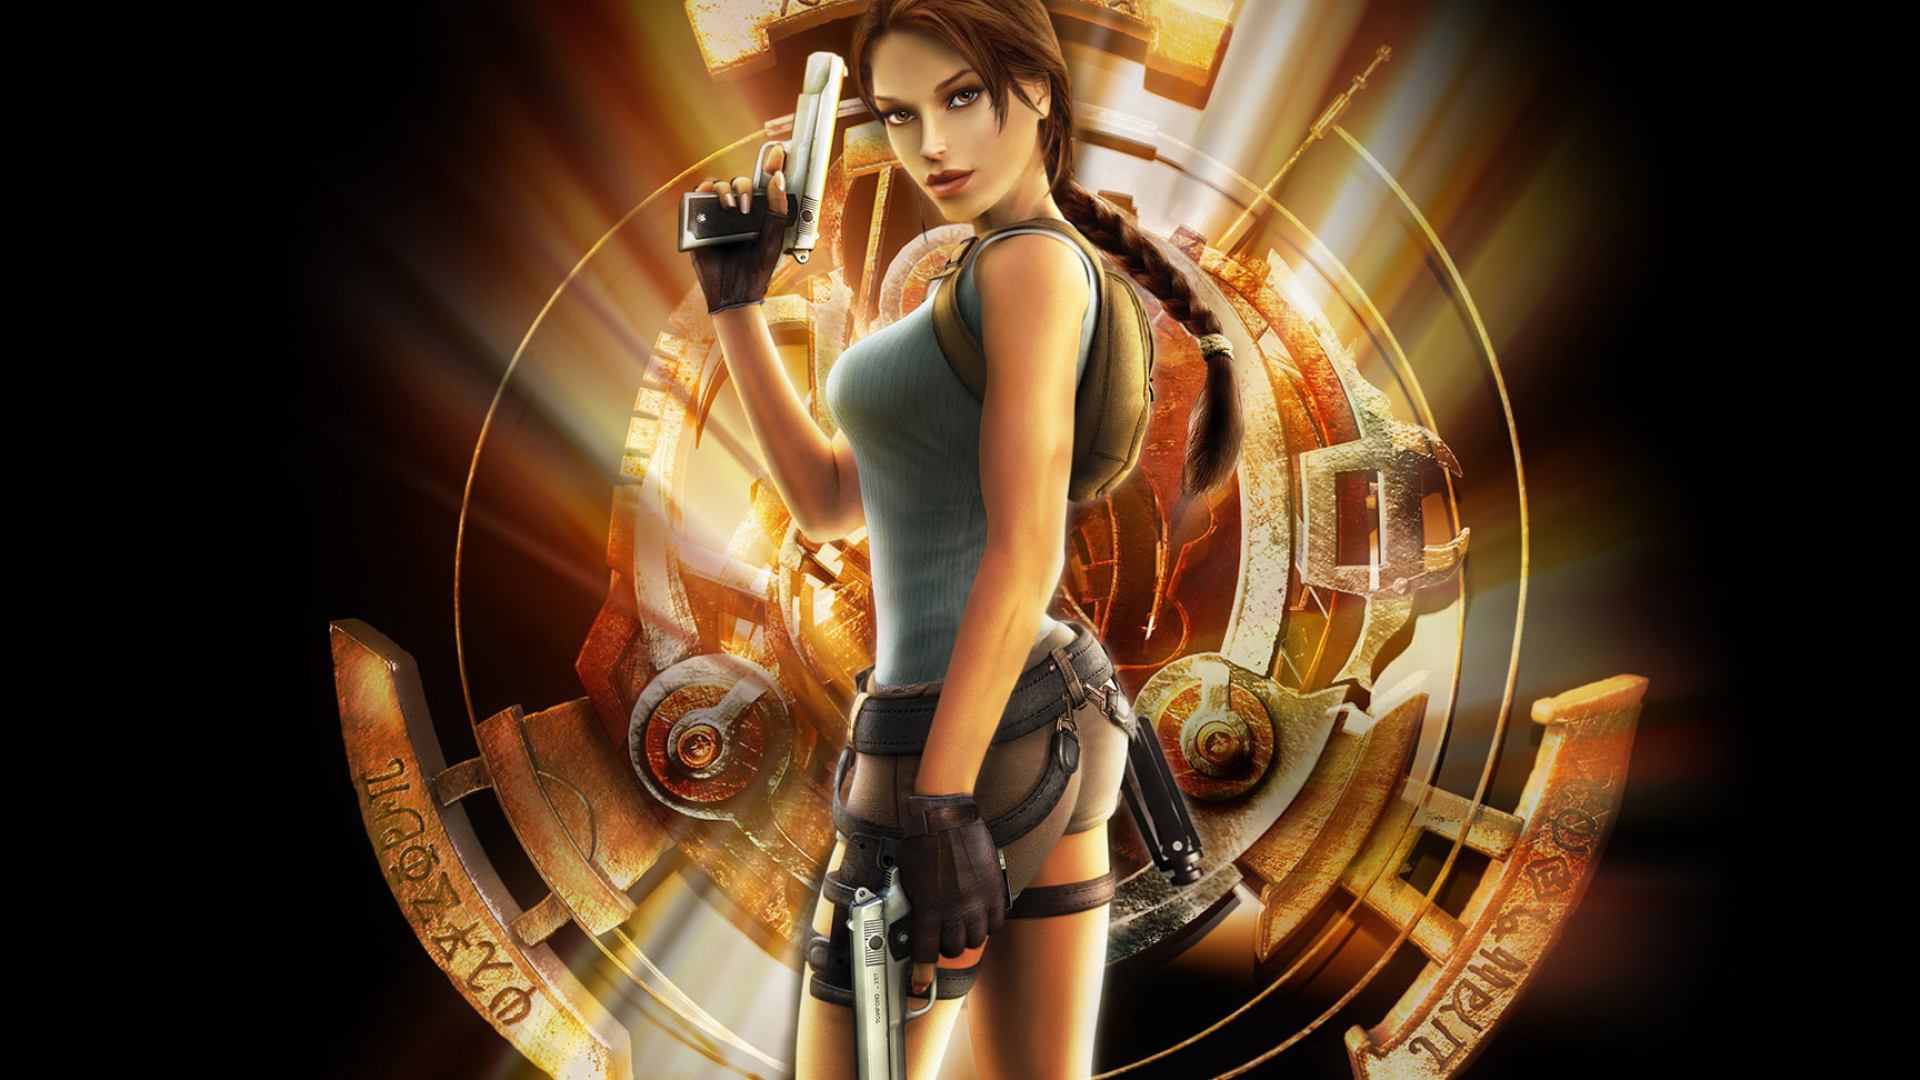 Tomb Raider game, Artistic wallpapers, Exciting gameplay, Iconic character, 1920x1080 Full HD Desktop